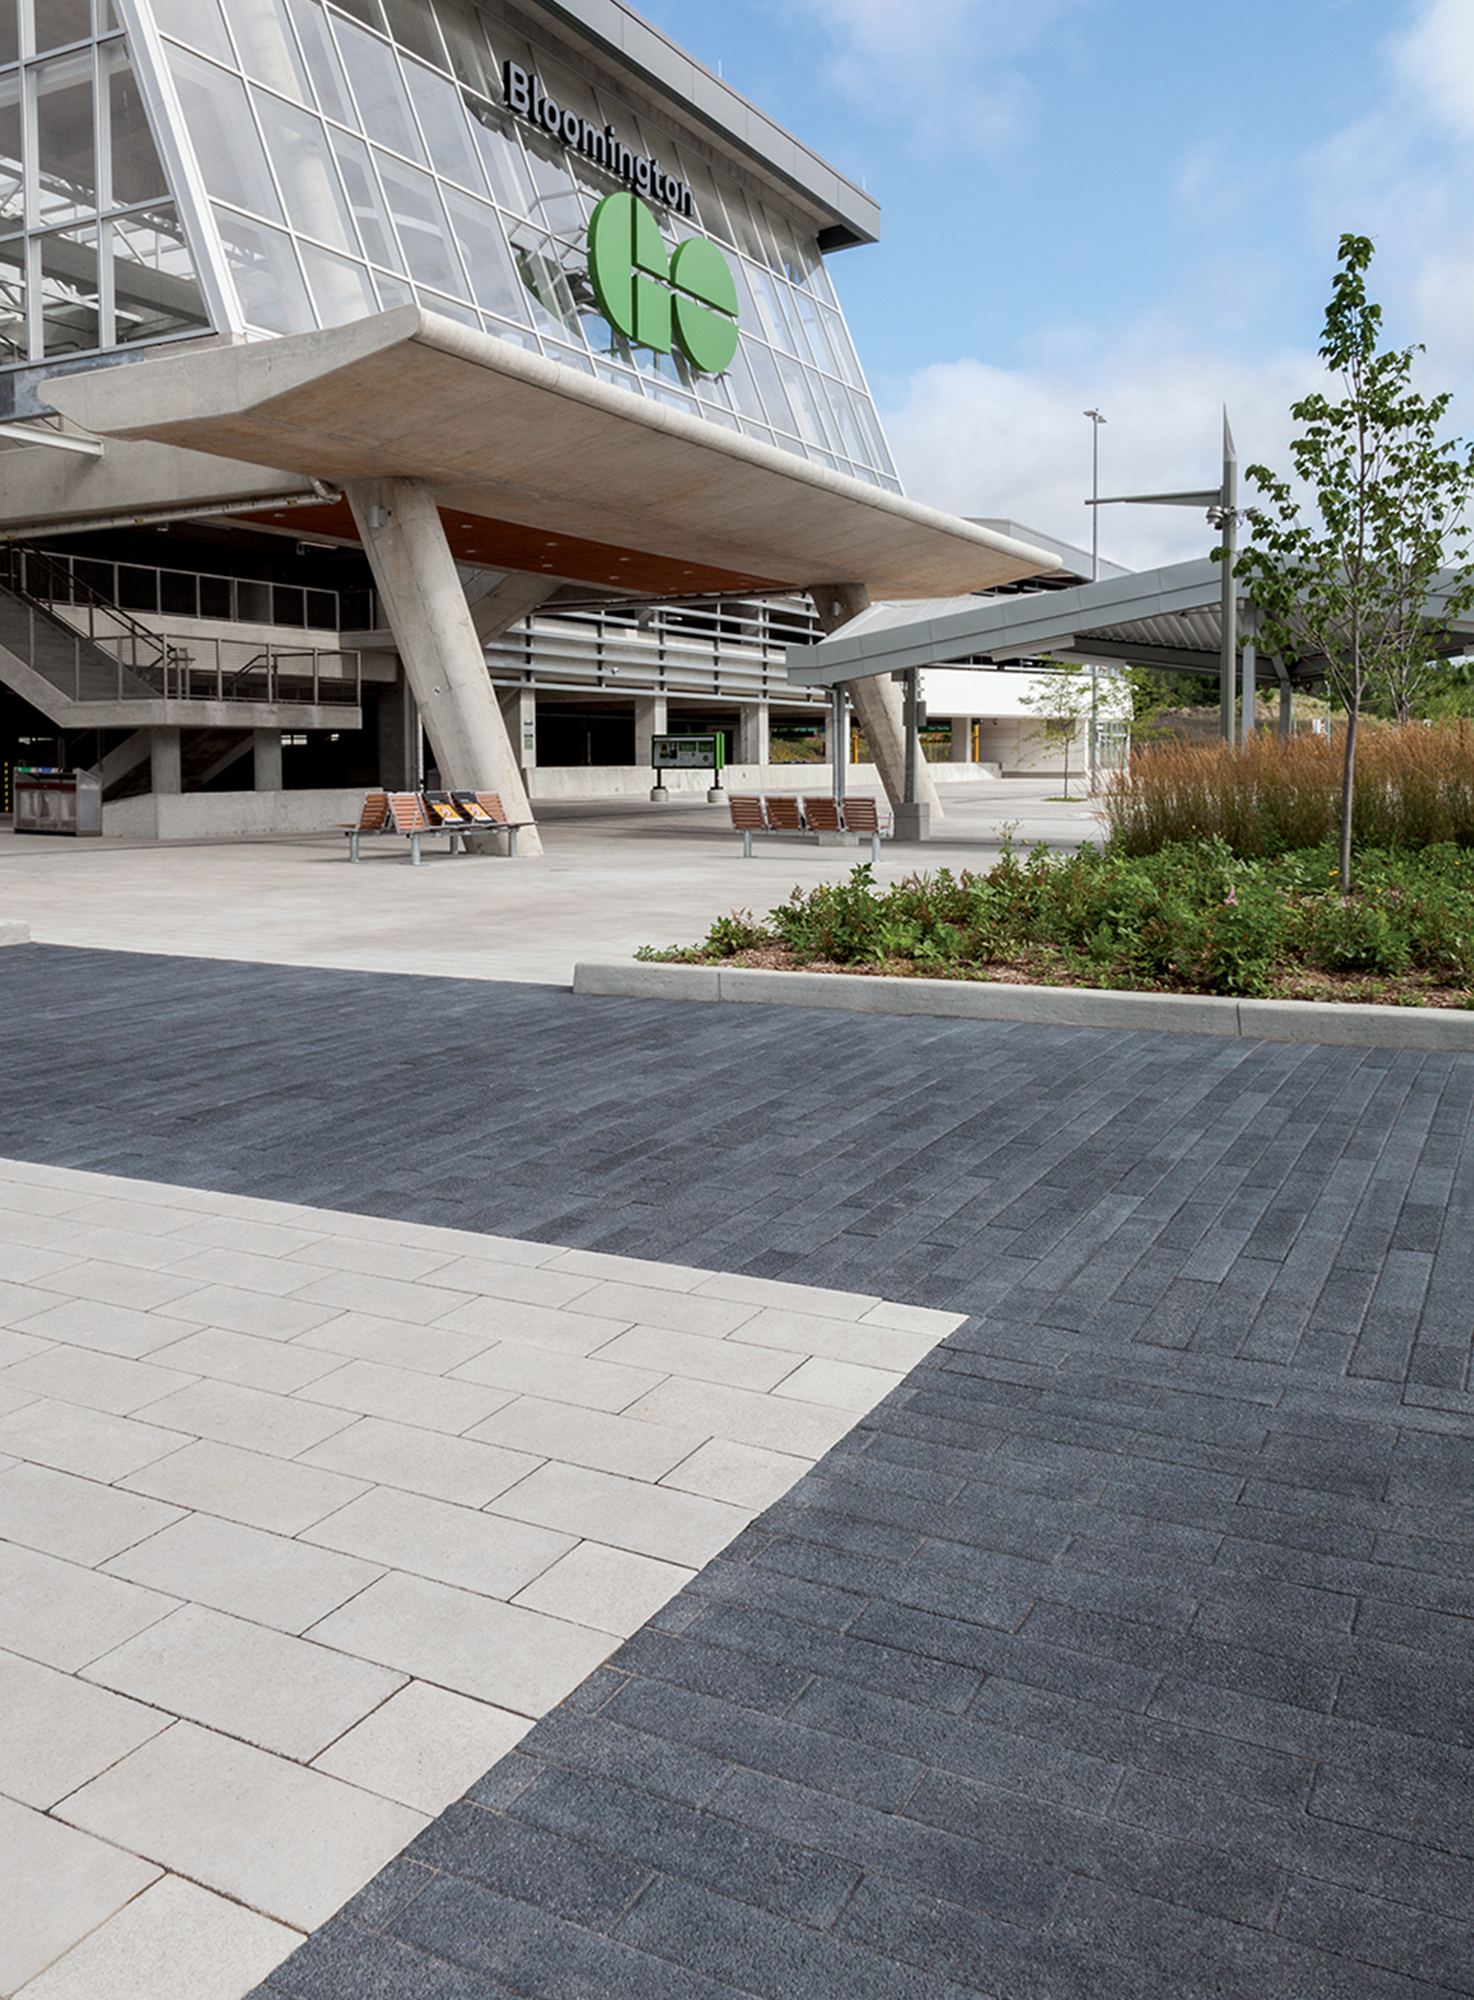 A Bloomington Go entrance has benches, signs and wastebins on white Umbriano pavers with walking areas delineated by Black Series pavers.